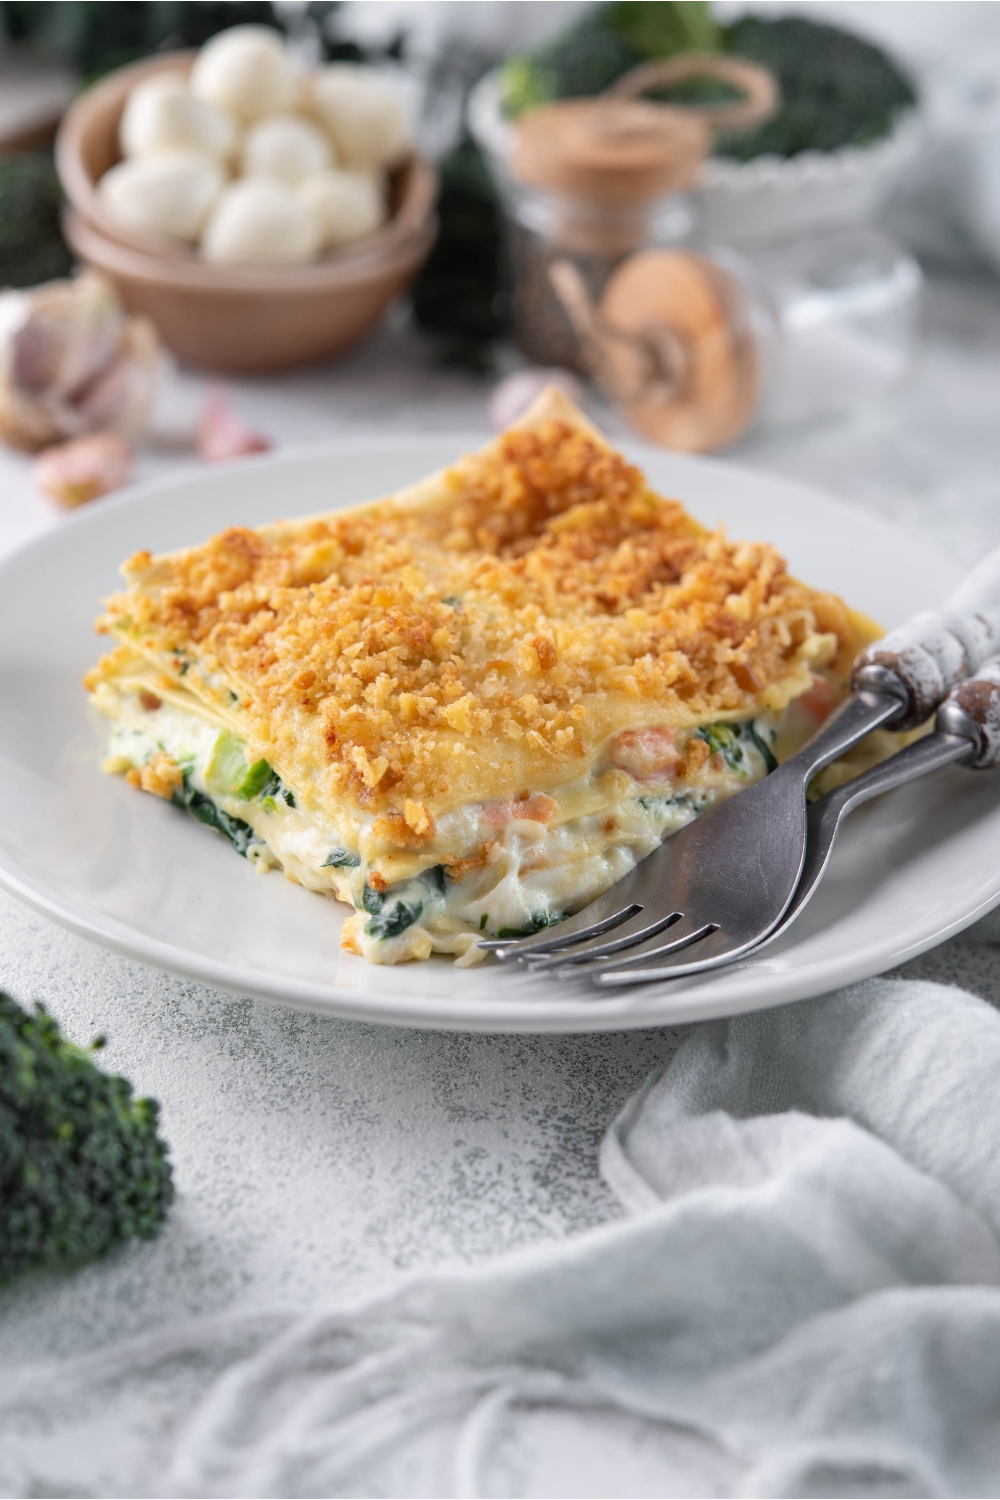 A serving of vegetable lasagna with cream sauce and a crispy cracker crumb topping on a plate with two forks.